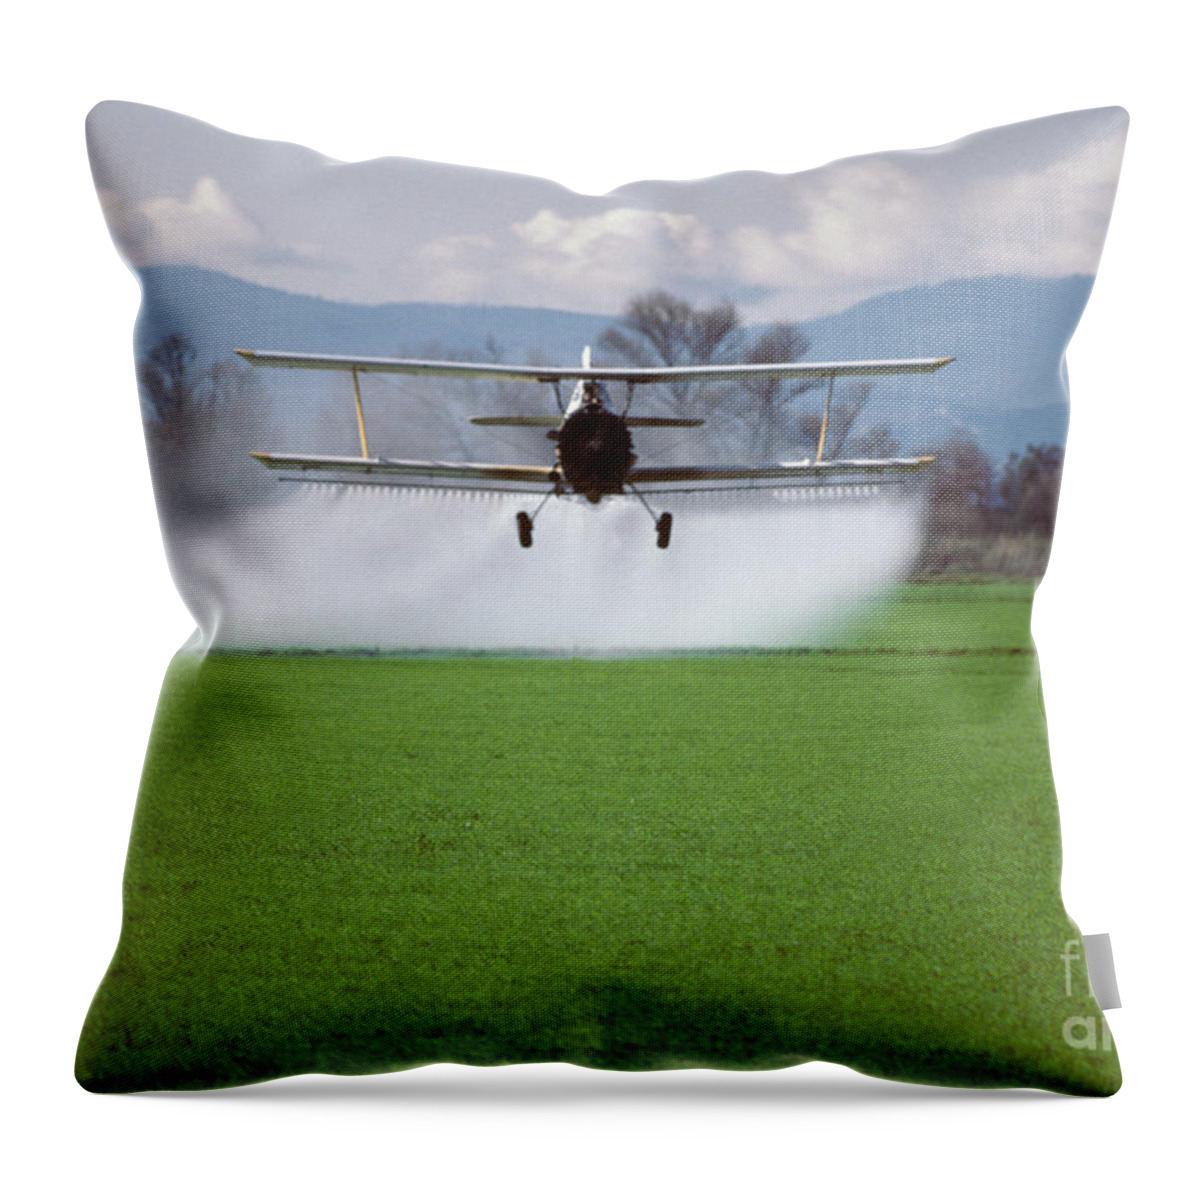 People Throw Pillow featuring the photograph Crop Dusting by Ron Sanford